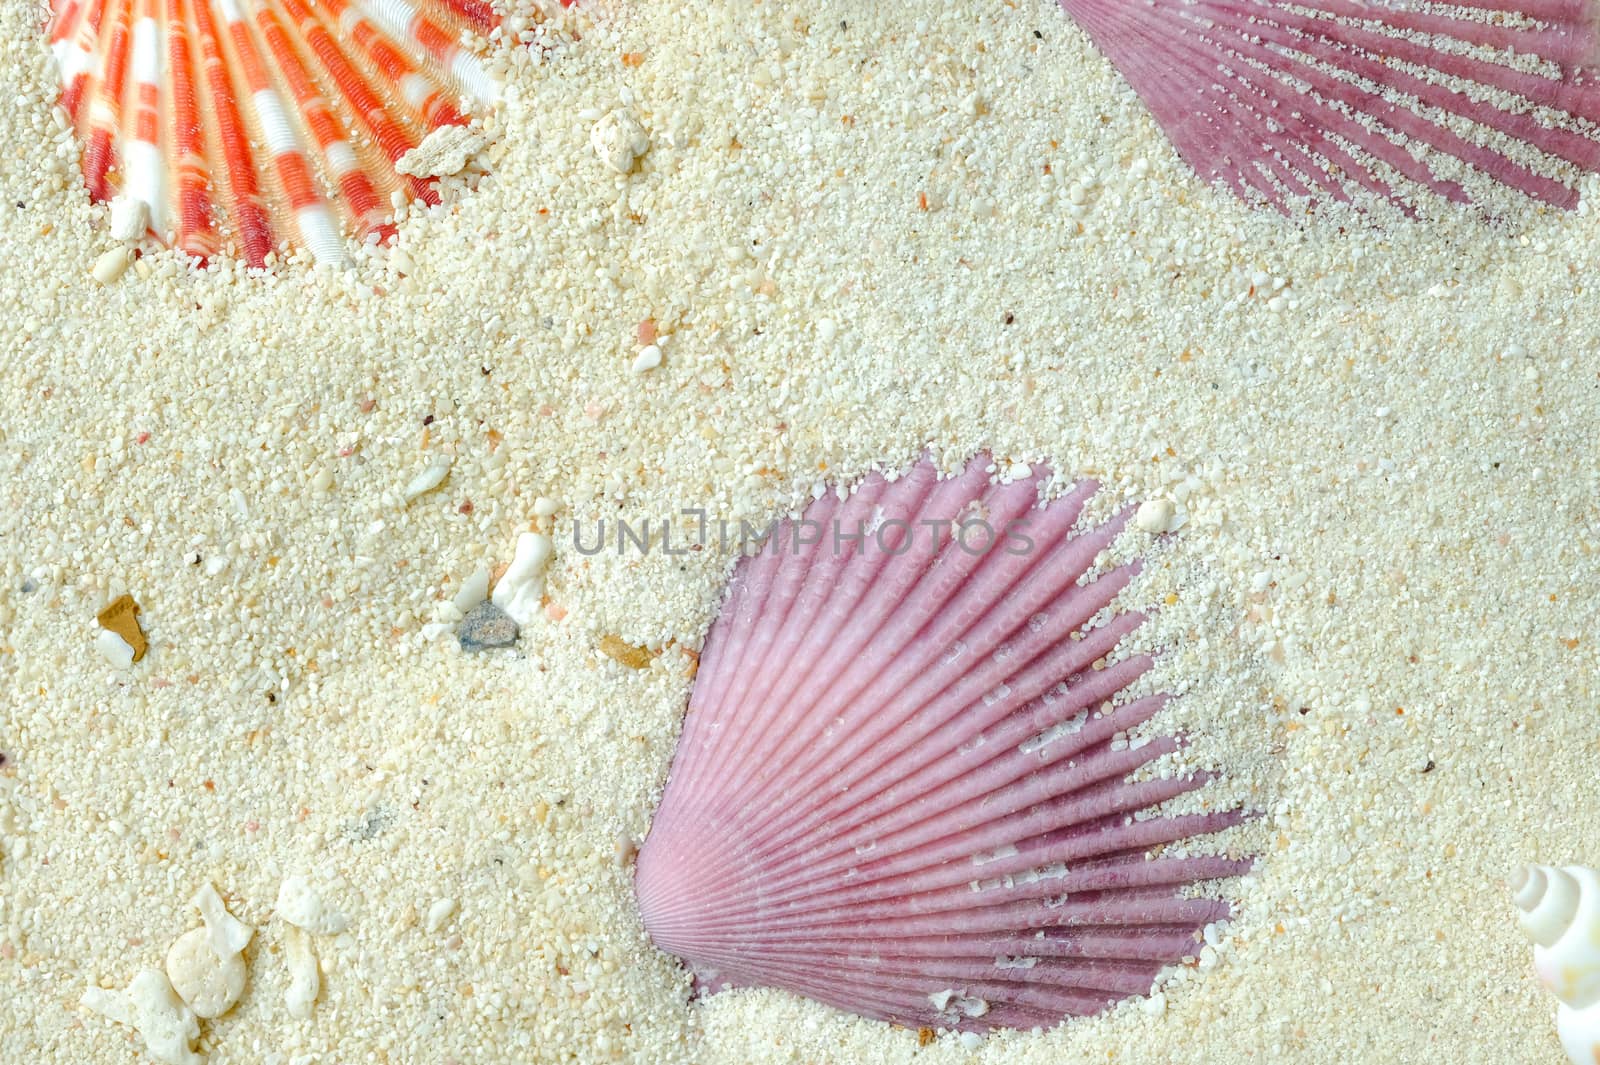 shells of red and orange scallop by Nawoot